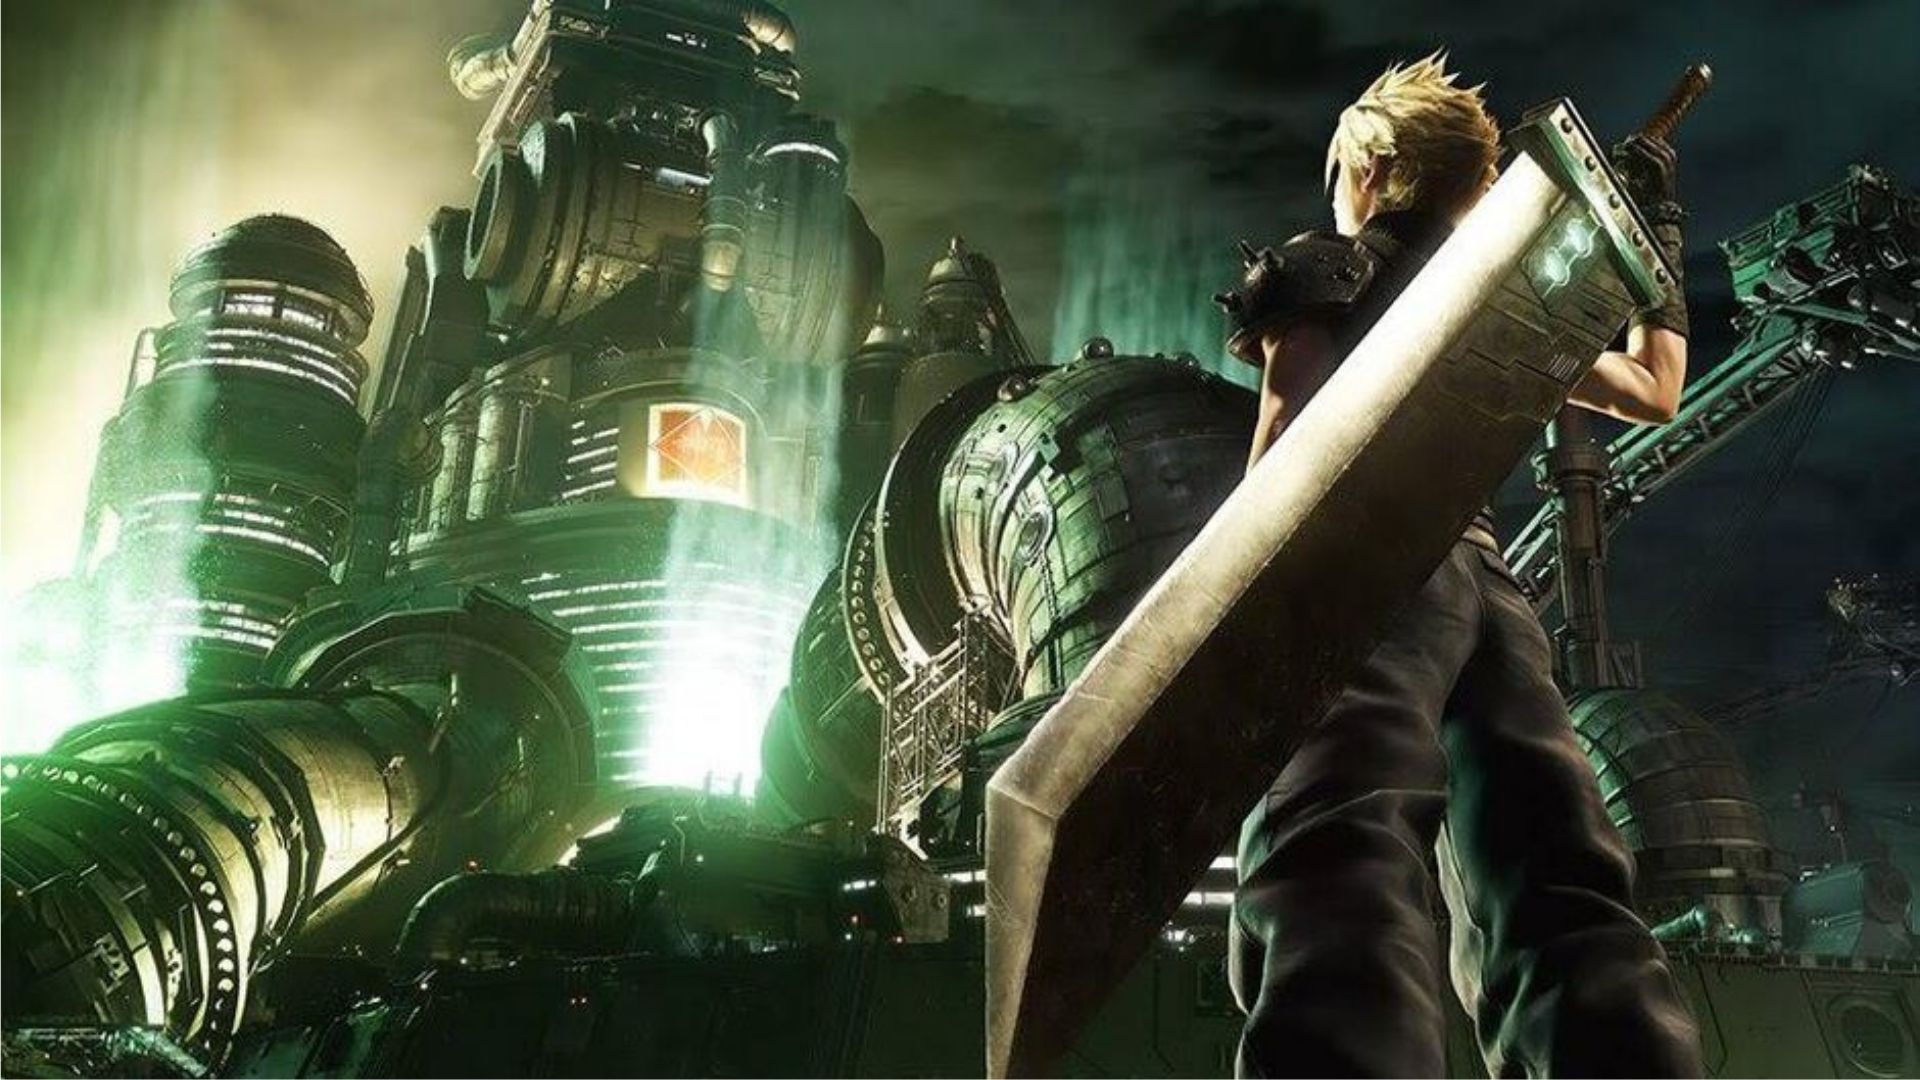 Upgrade FF7 Remake to PS5